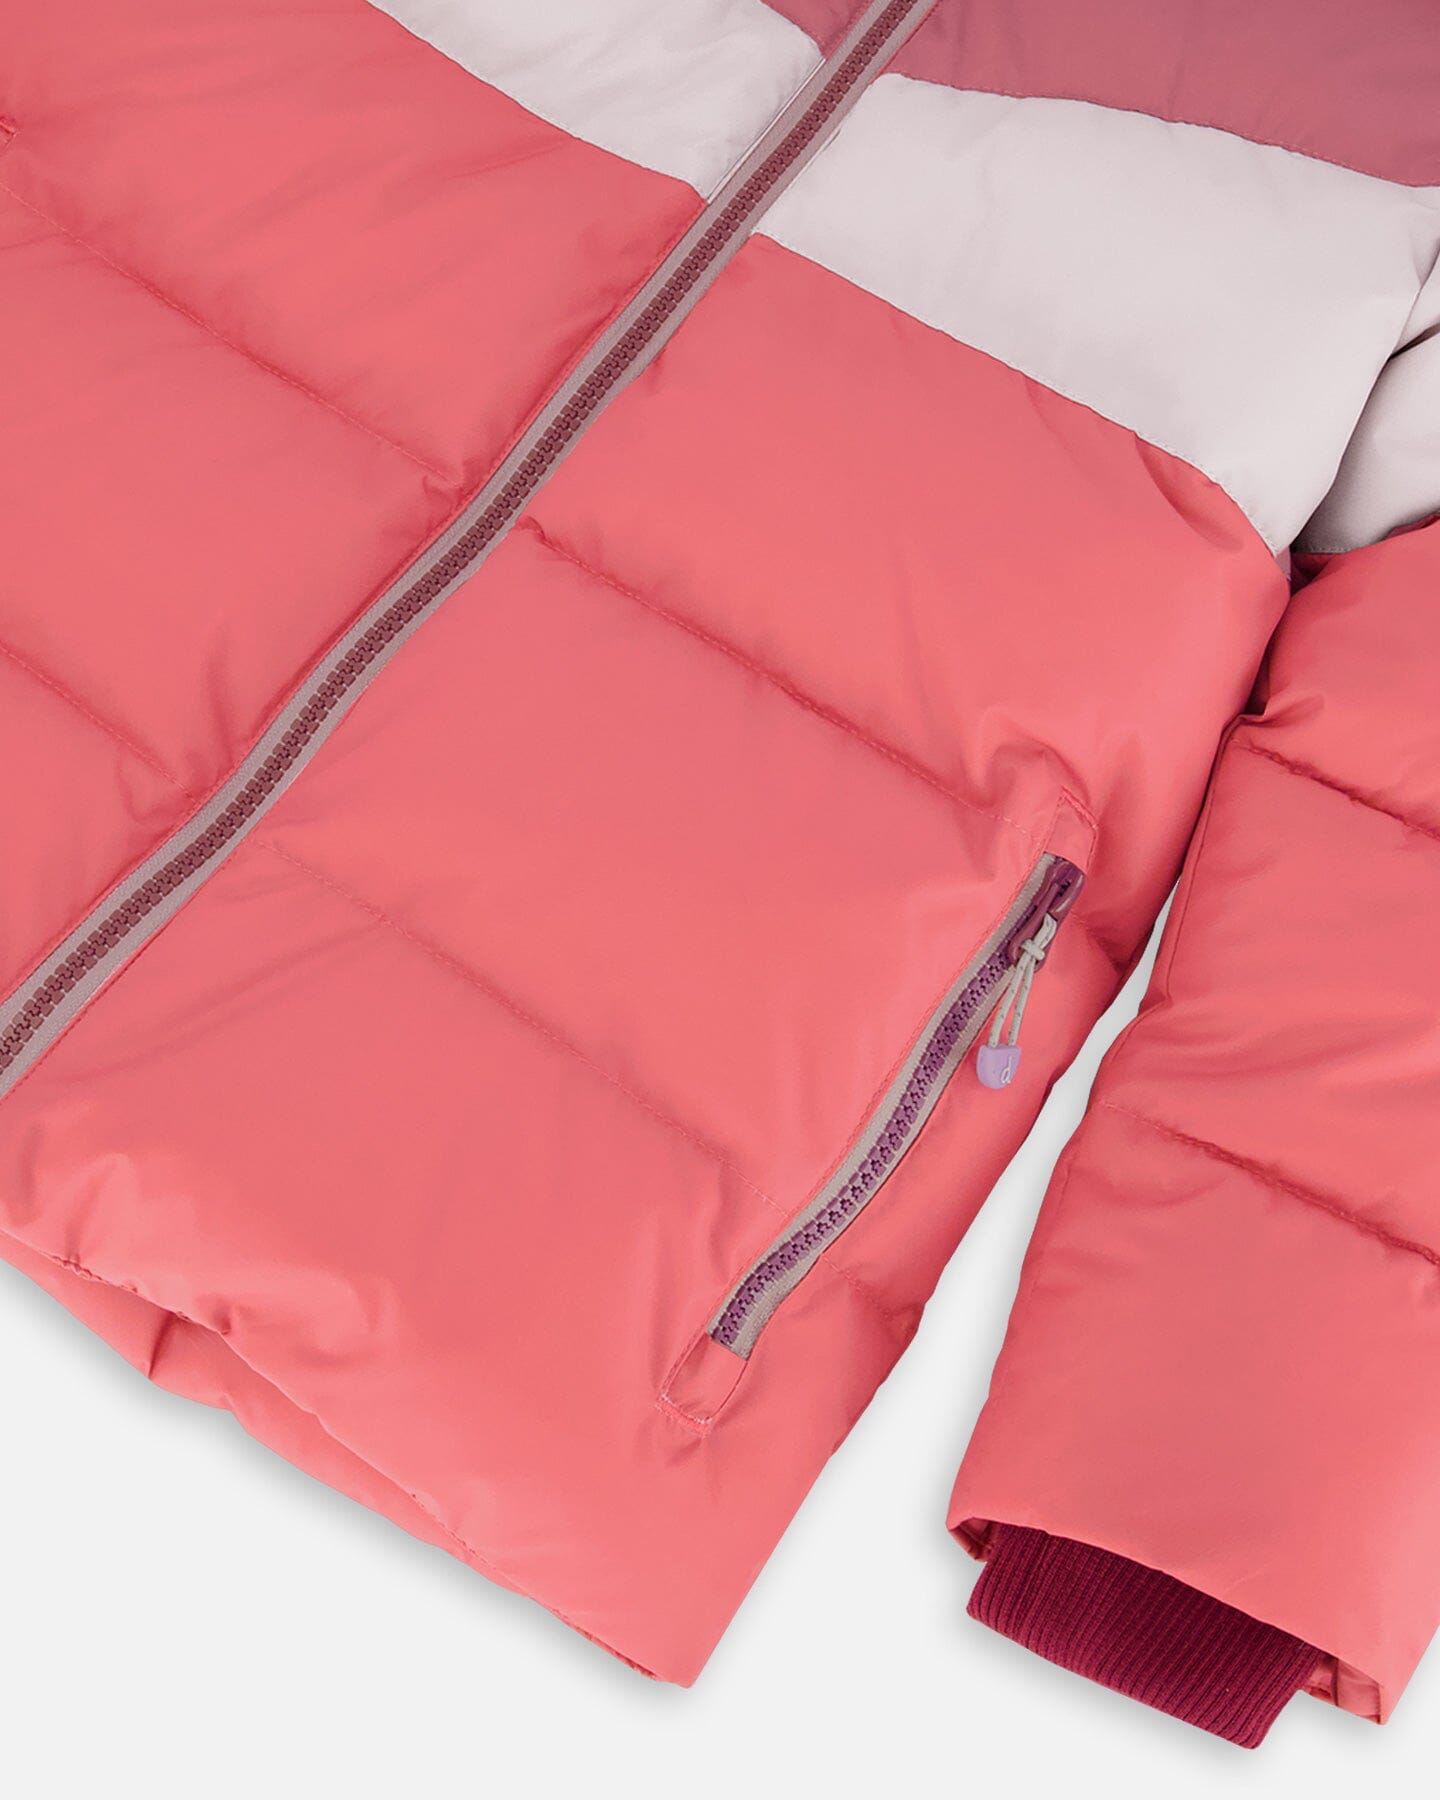 Puffy Jacket Pink And Plum Color Block - F20W57_679